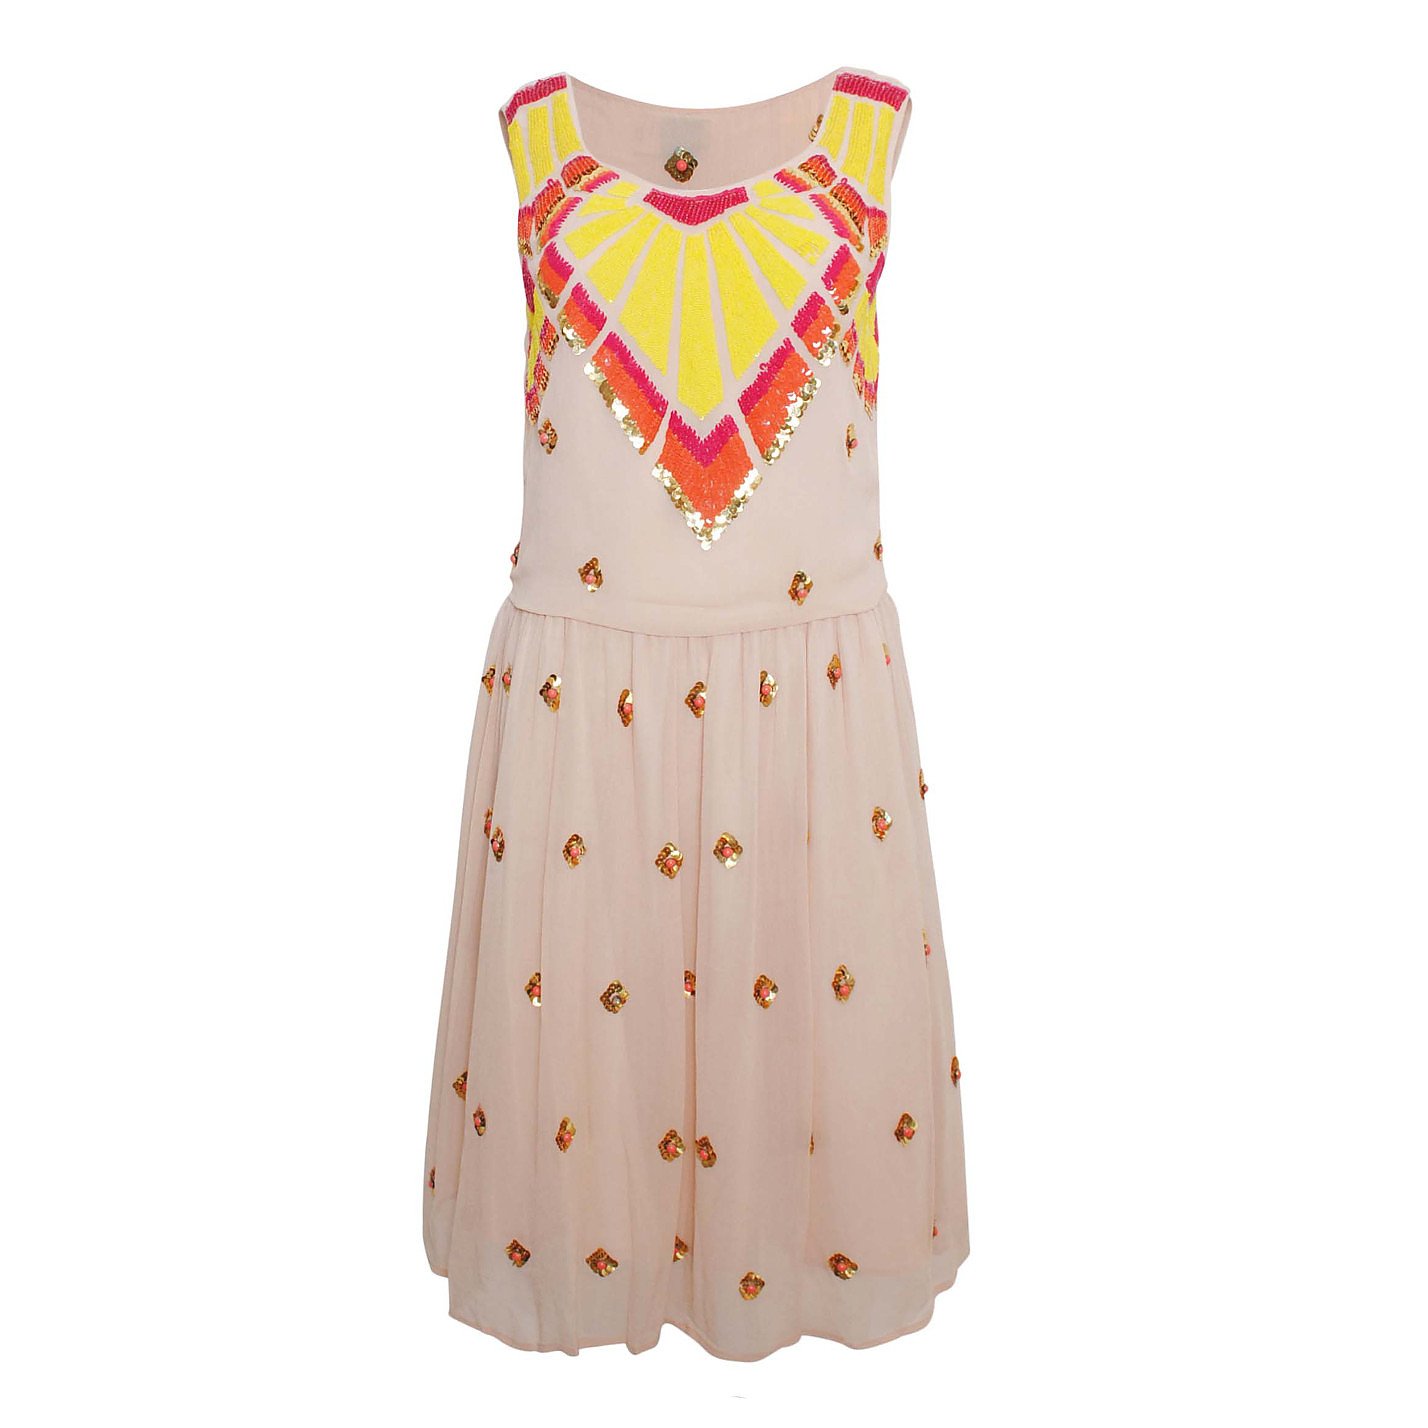 ALICE by Temperley Embellished Mini Dress